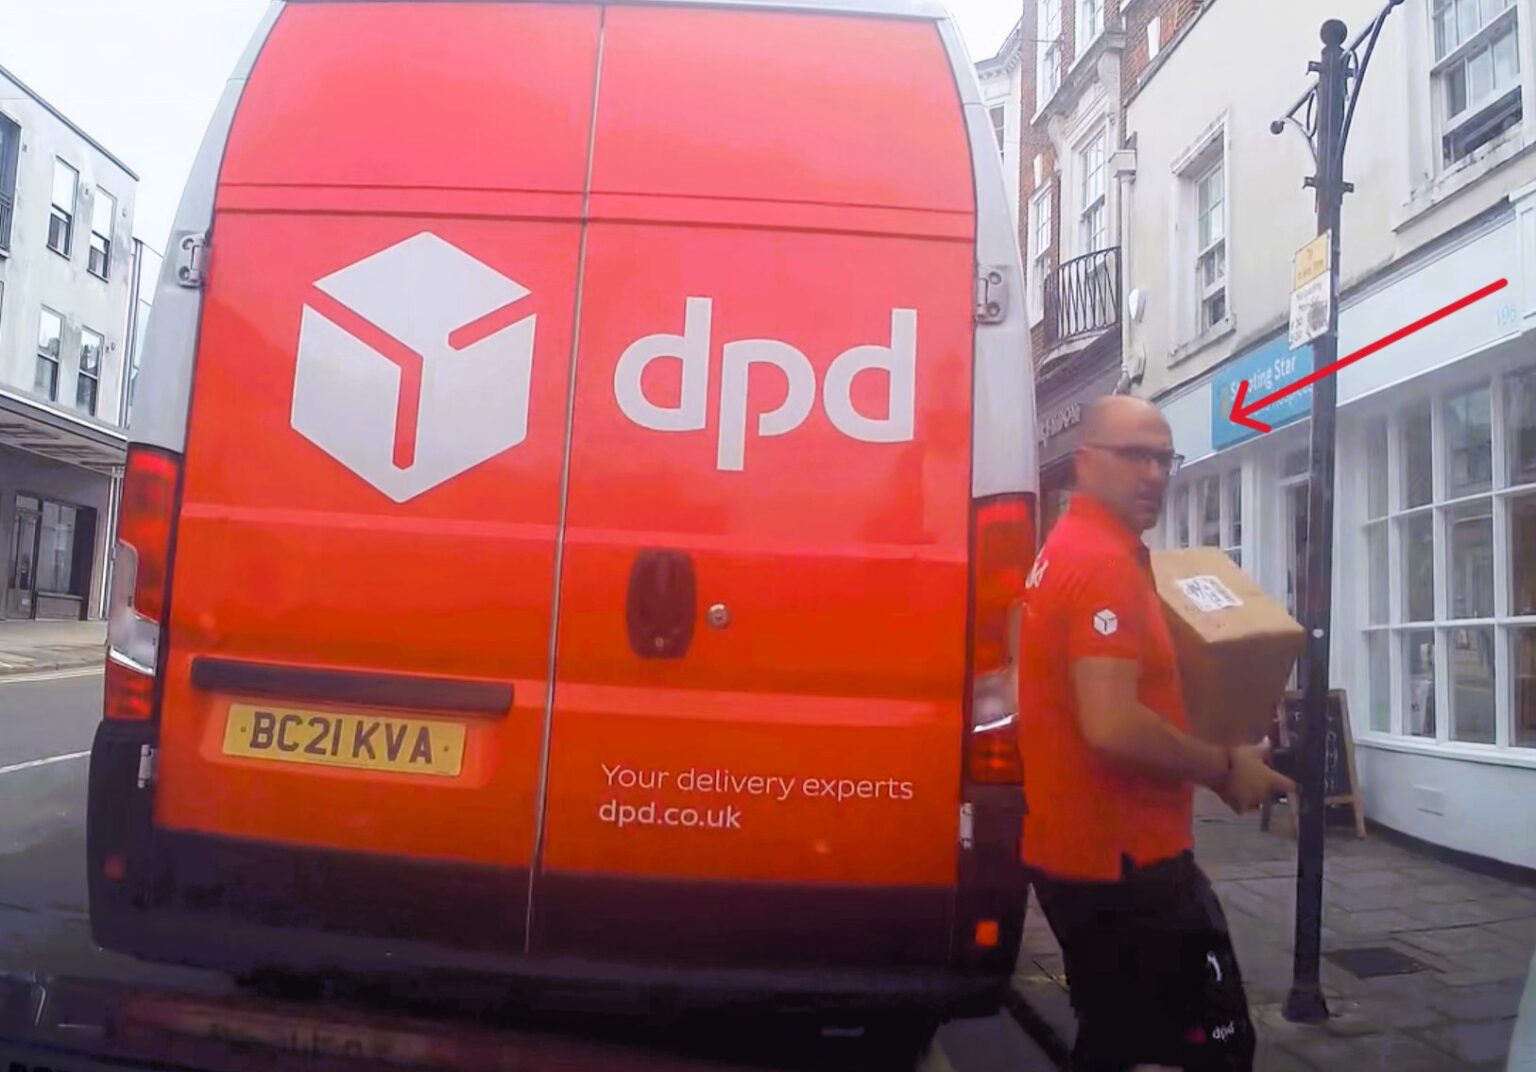 A distracted DPD delivery driver walks into a post in Guildford, Surrey, causing a hilarious dash cam moment. Luckily, he wasn’t hurt. Watch the funny incident unfold.